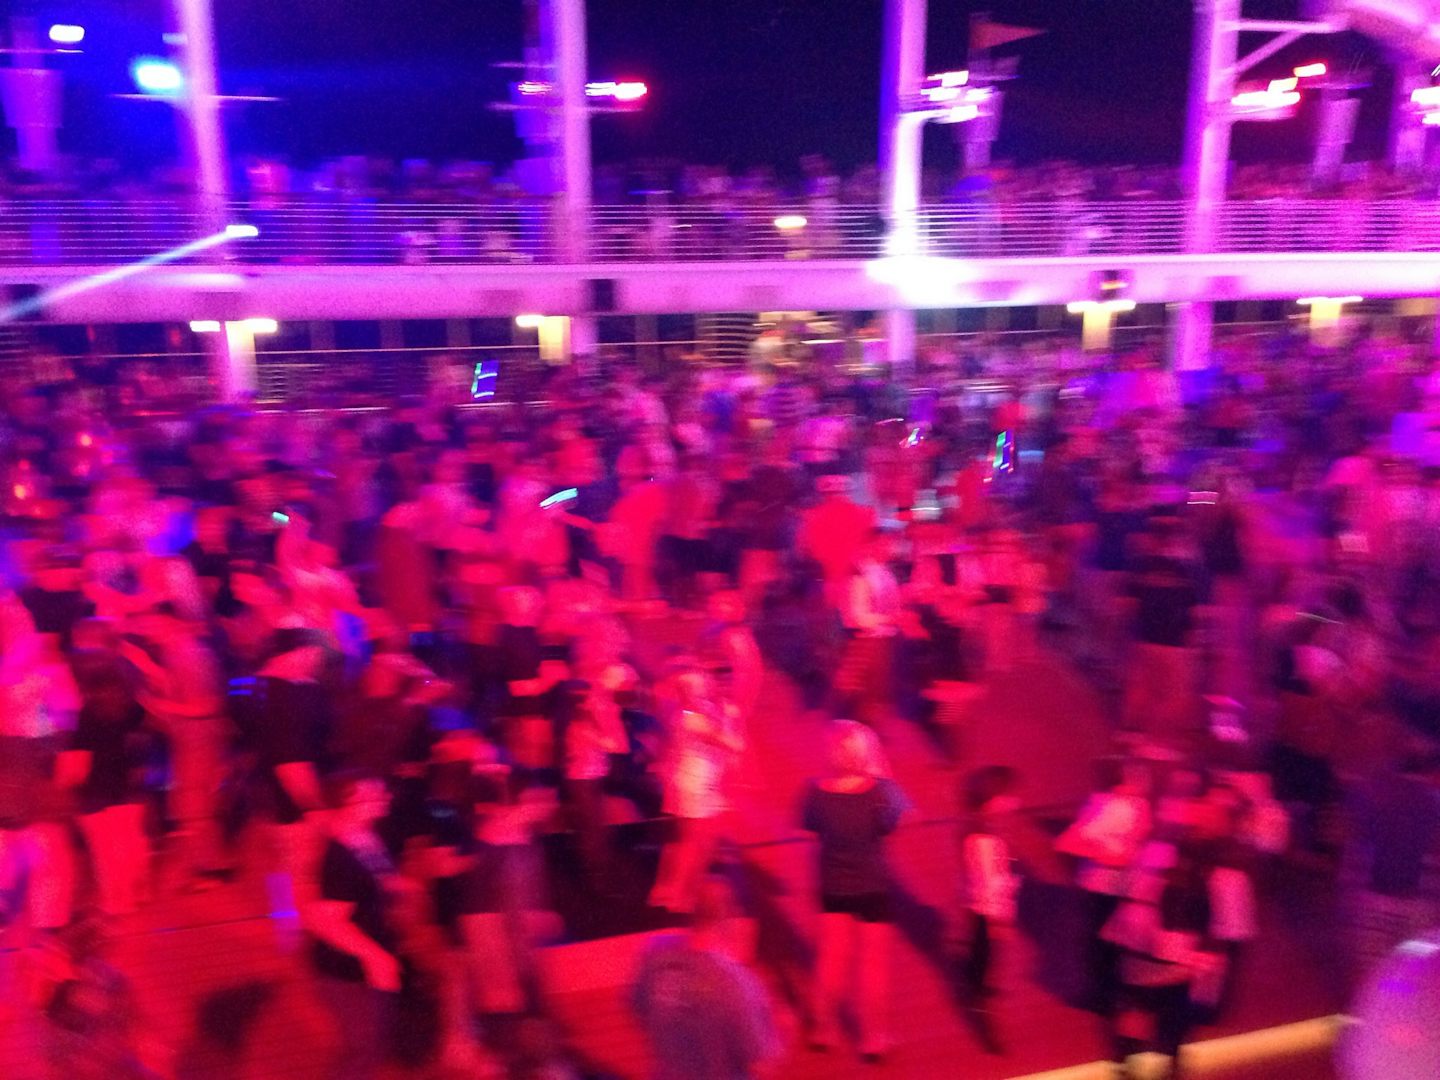 Pirate party on top deck again very busy.  We stood at the very top